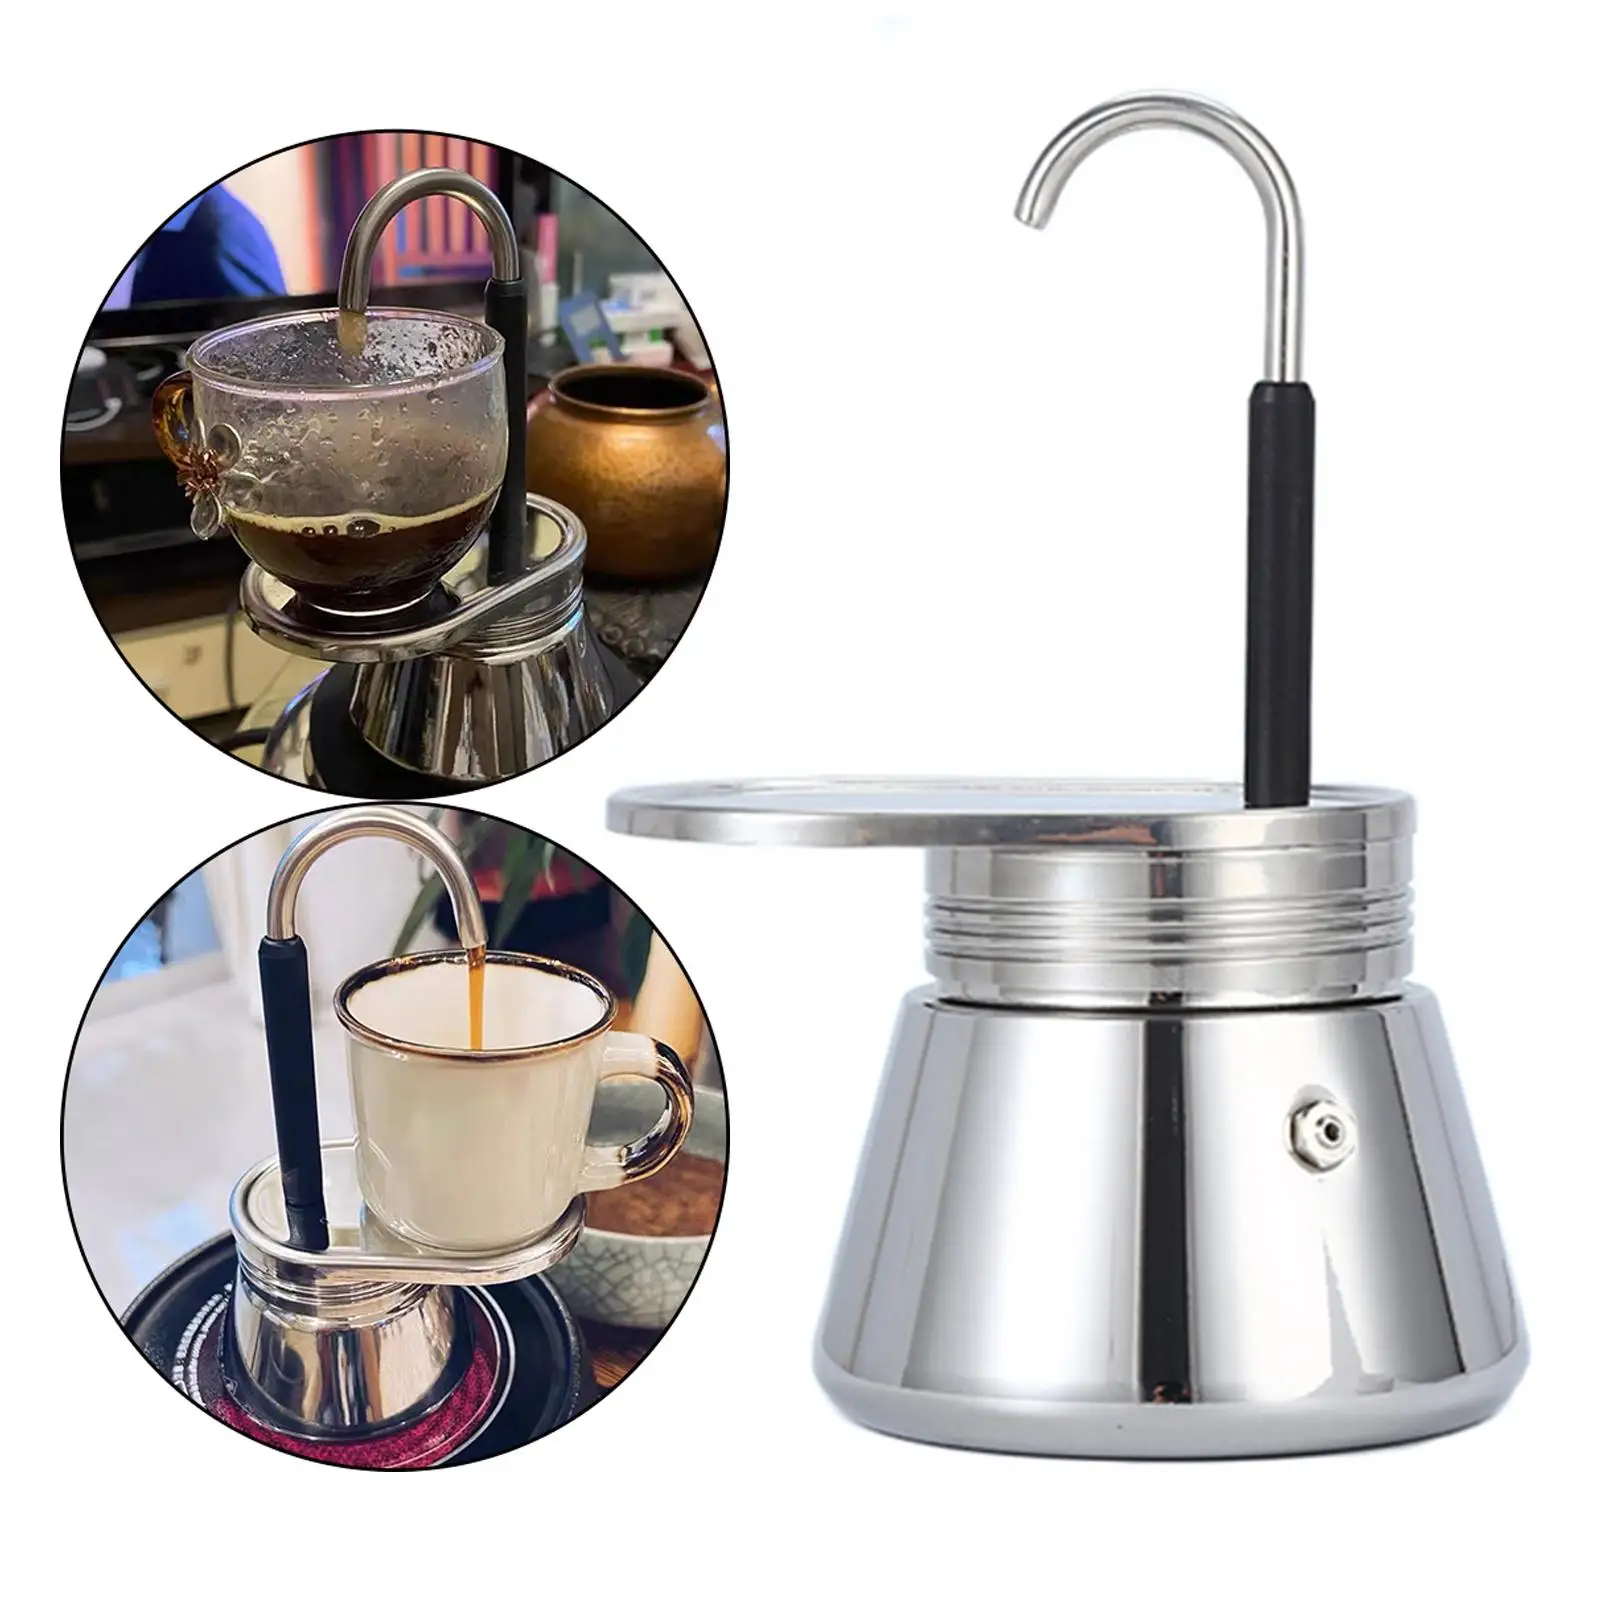 Traveling Stovetop Espresso Coffee Pot Stainless Steel, Convenient Easy to Operate Silver for Home Office Polished Portable DIY